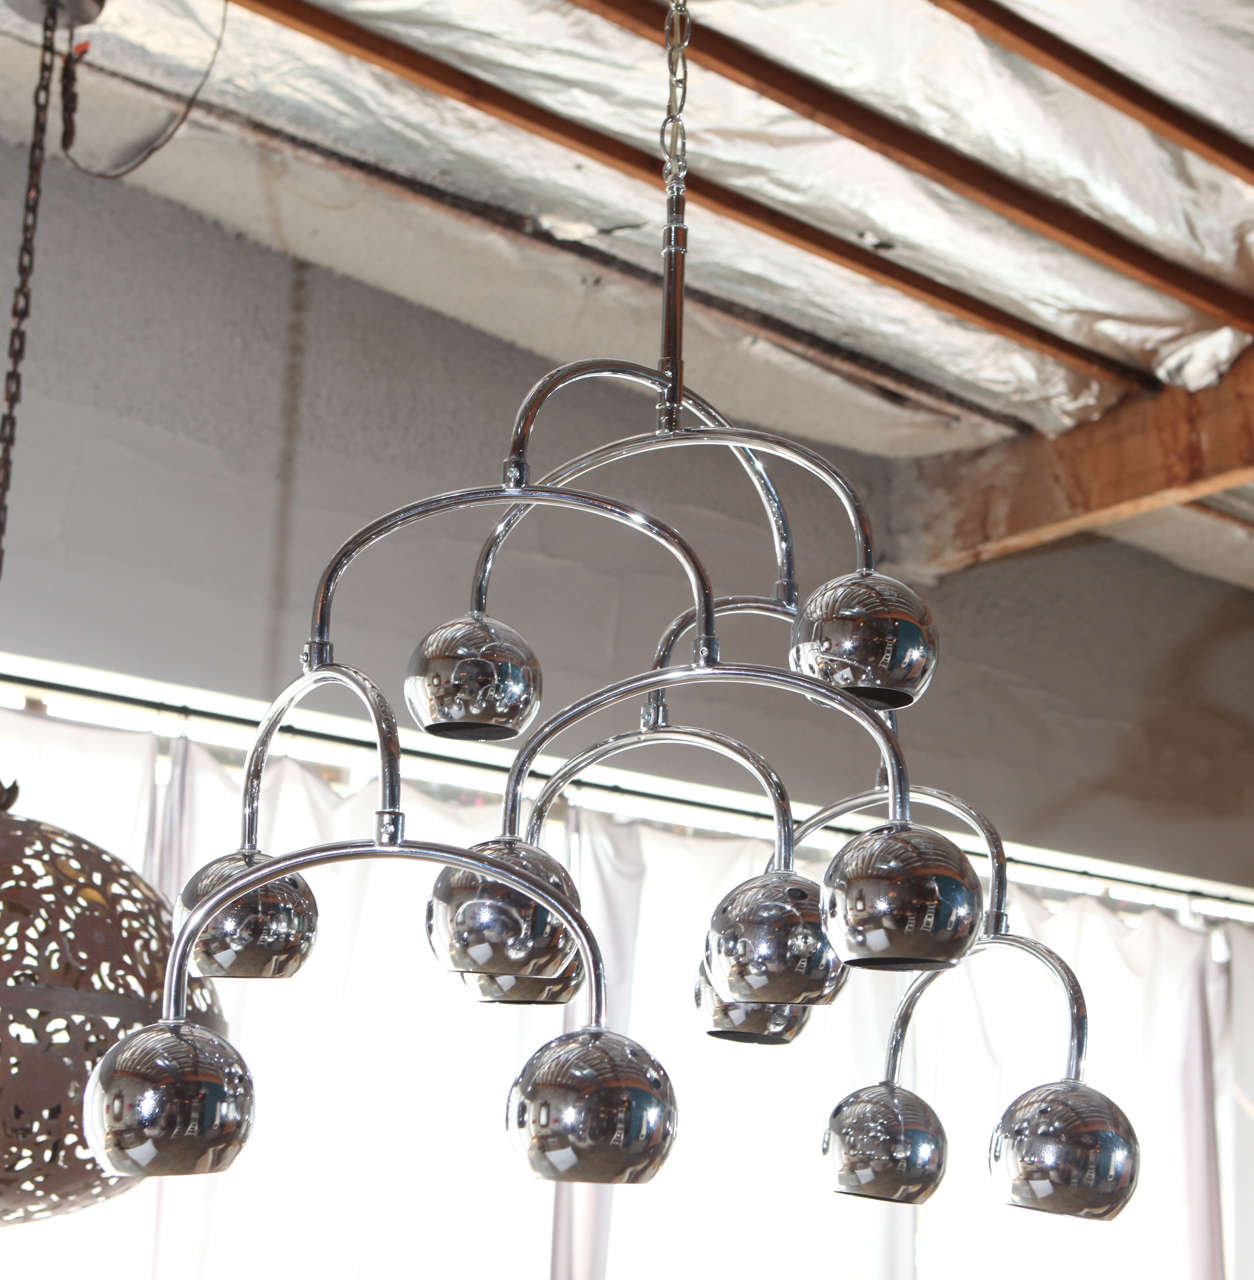 Robert Sonneman chromed steel chandelier, can be adjusted to design preference. Visit the Paul Marra storefront to see more lighting including 21st Century.